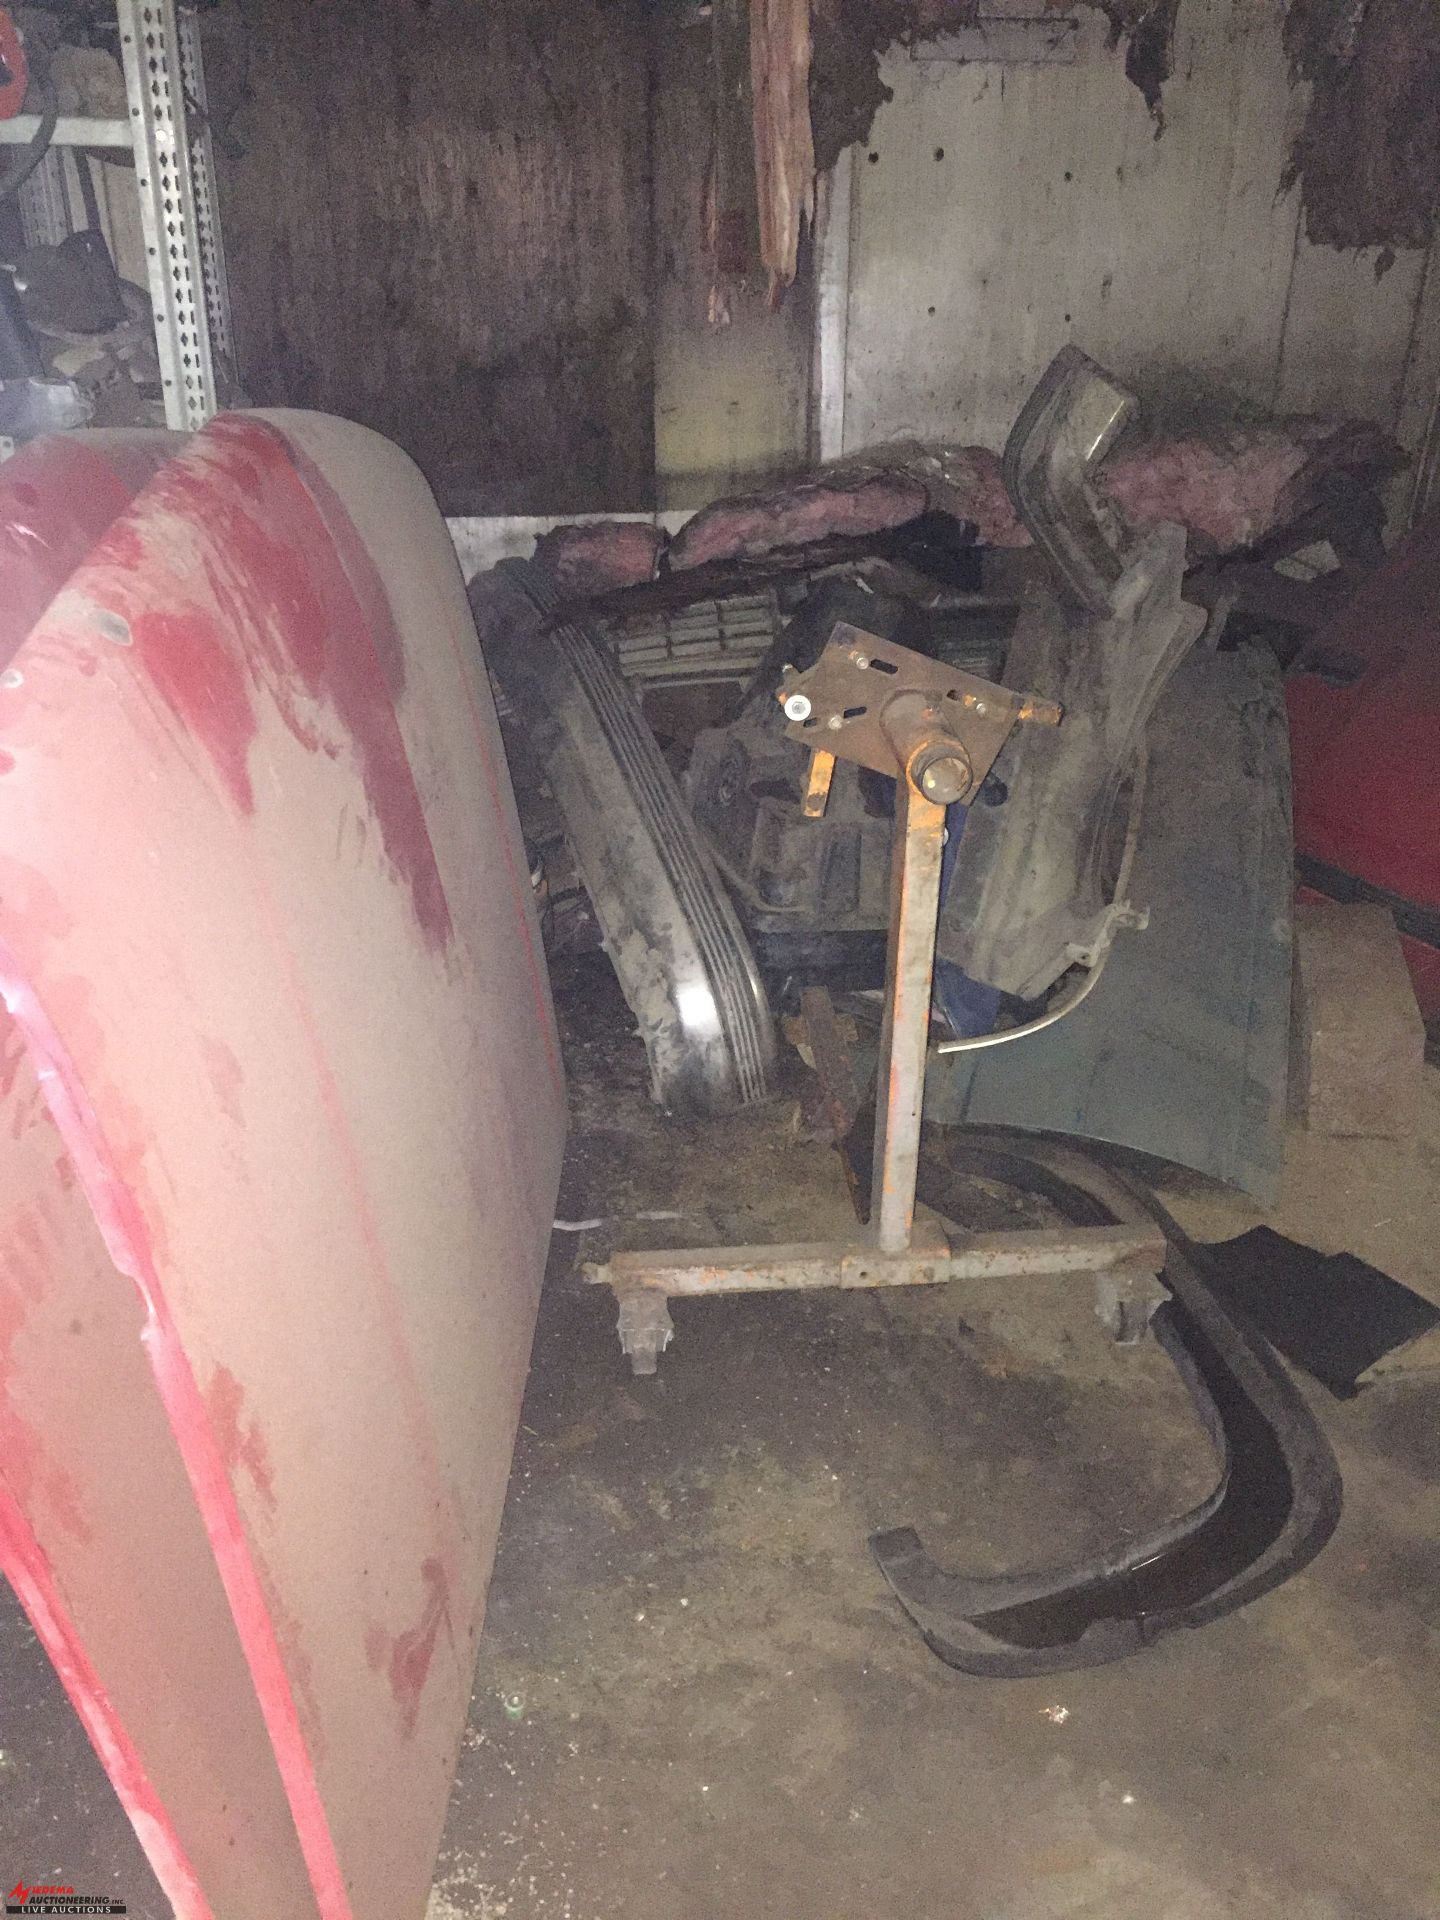 ASSORTED CAR BODY PARTS, ENGINE STAND, METAL CABINET, SMALL BUMPER JACK AND MORE, CONTENTS OF MIDDLE